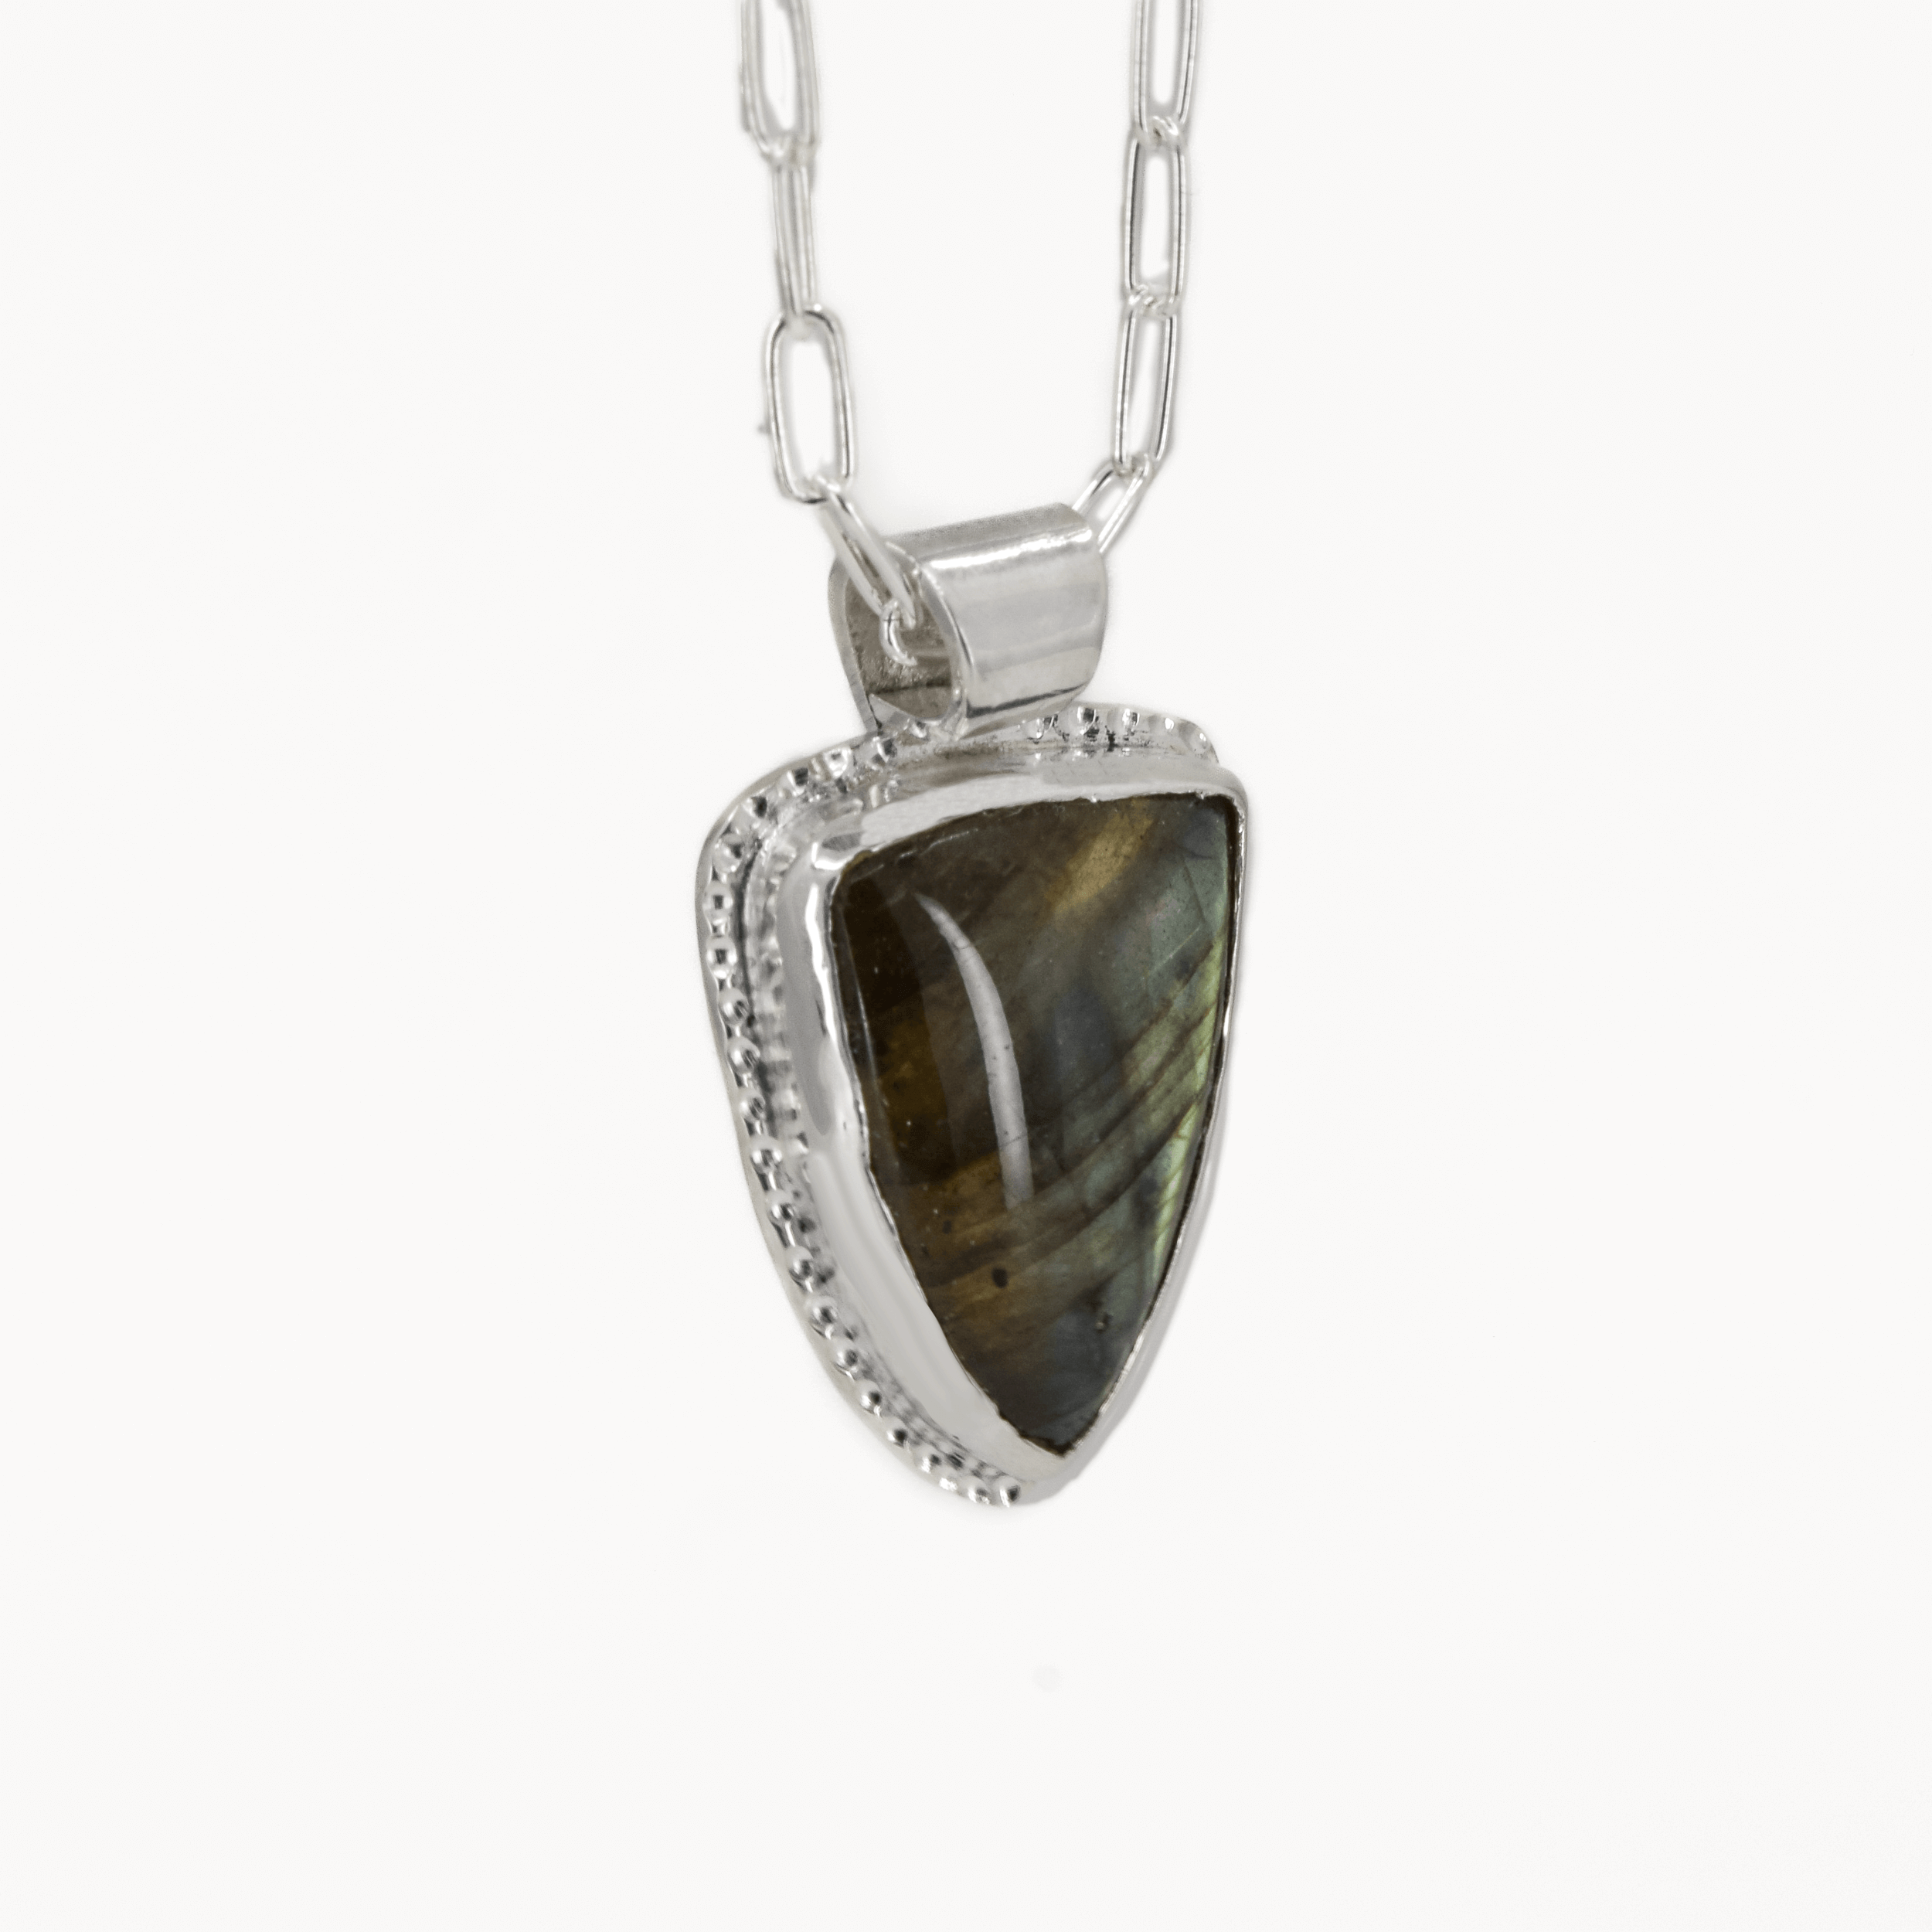 green arrow pendant featuring a green labradorite stone, hanging on a paperclip style chain